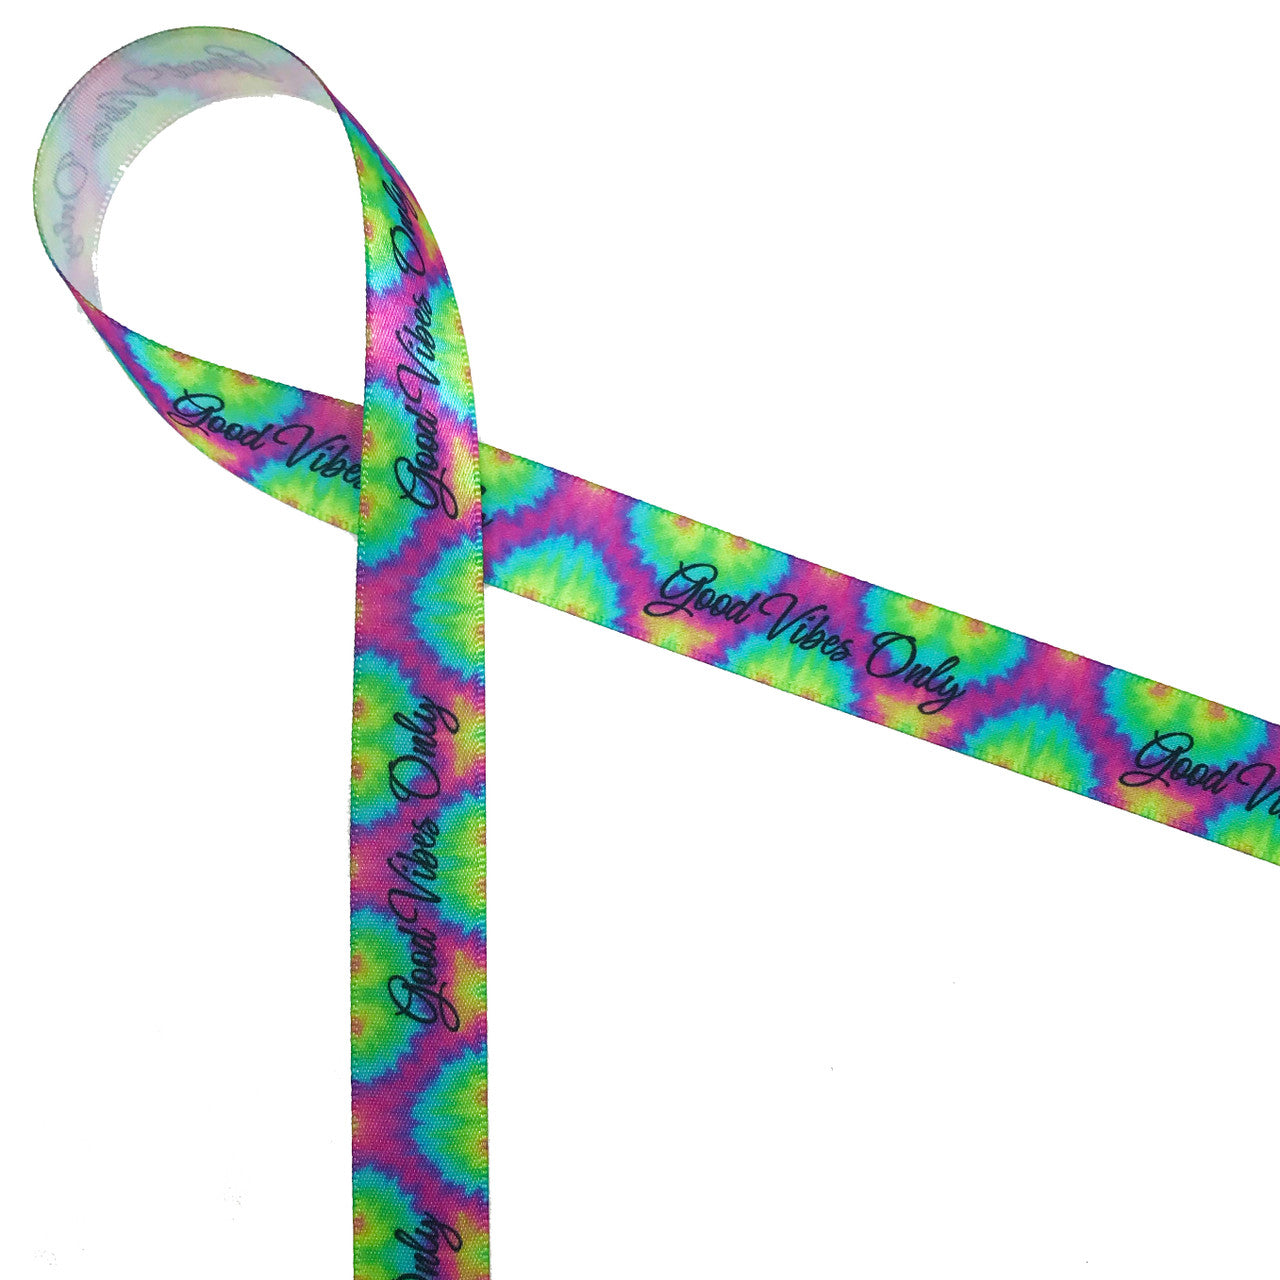 Tie Dye with Good Vibes on 5/8" white single face satin